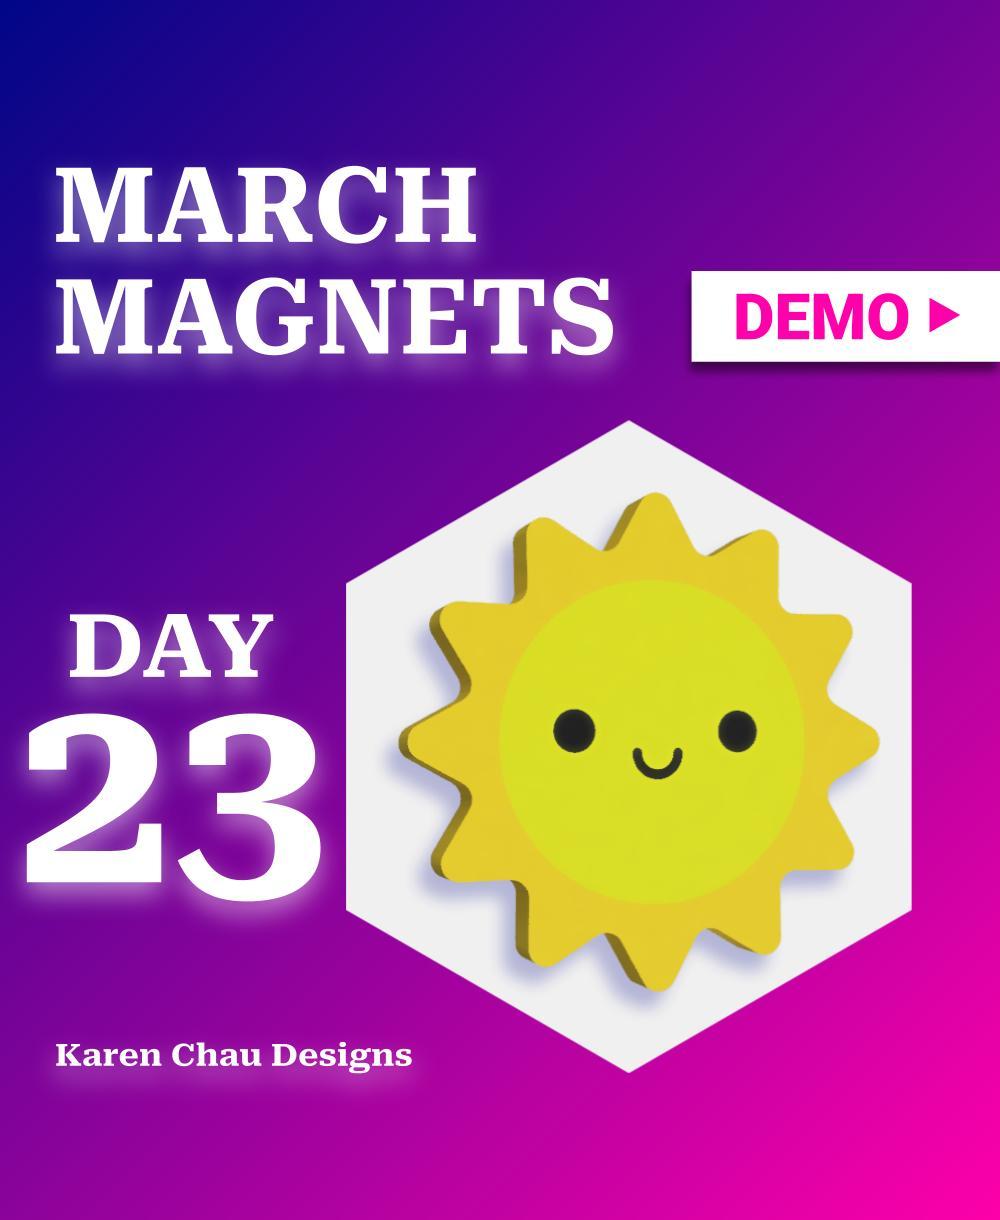 March Magnets - Day 23 #marchmagnets | Cute Sun Magnet 3d model